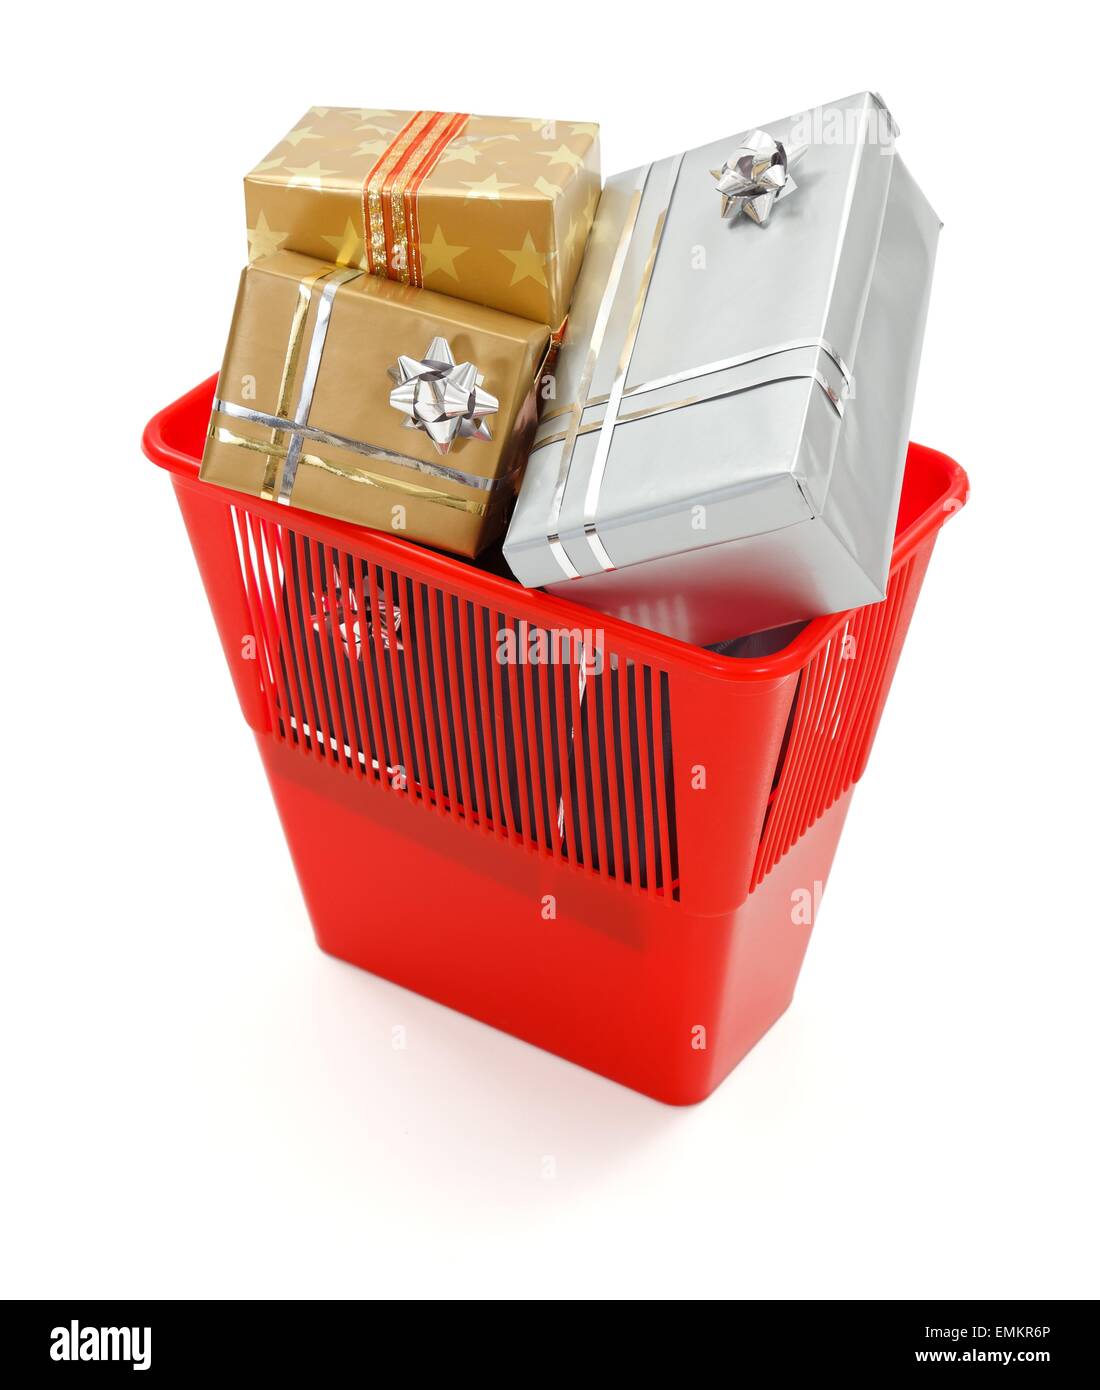 Red garbage bin full of nice present boxes Stock Photo